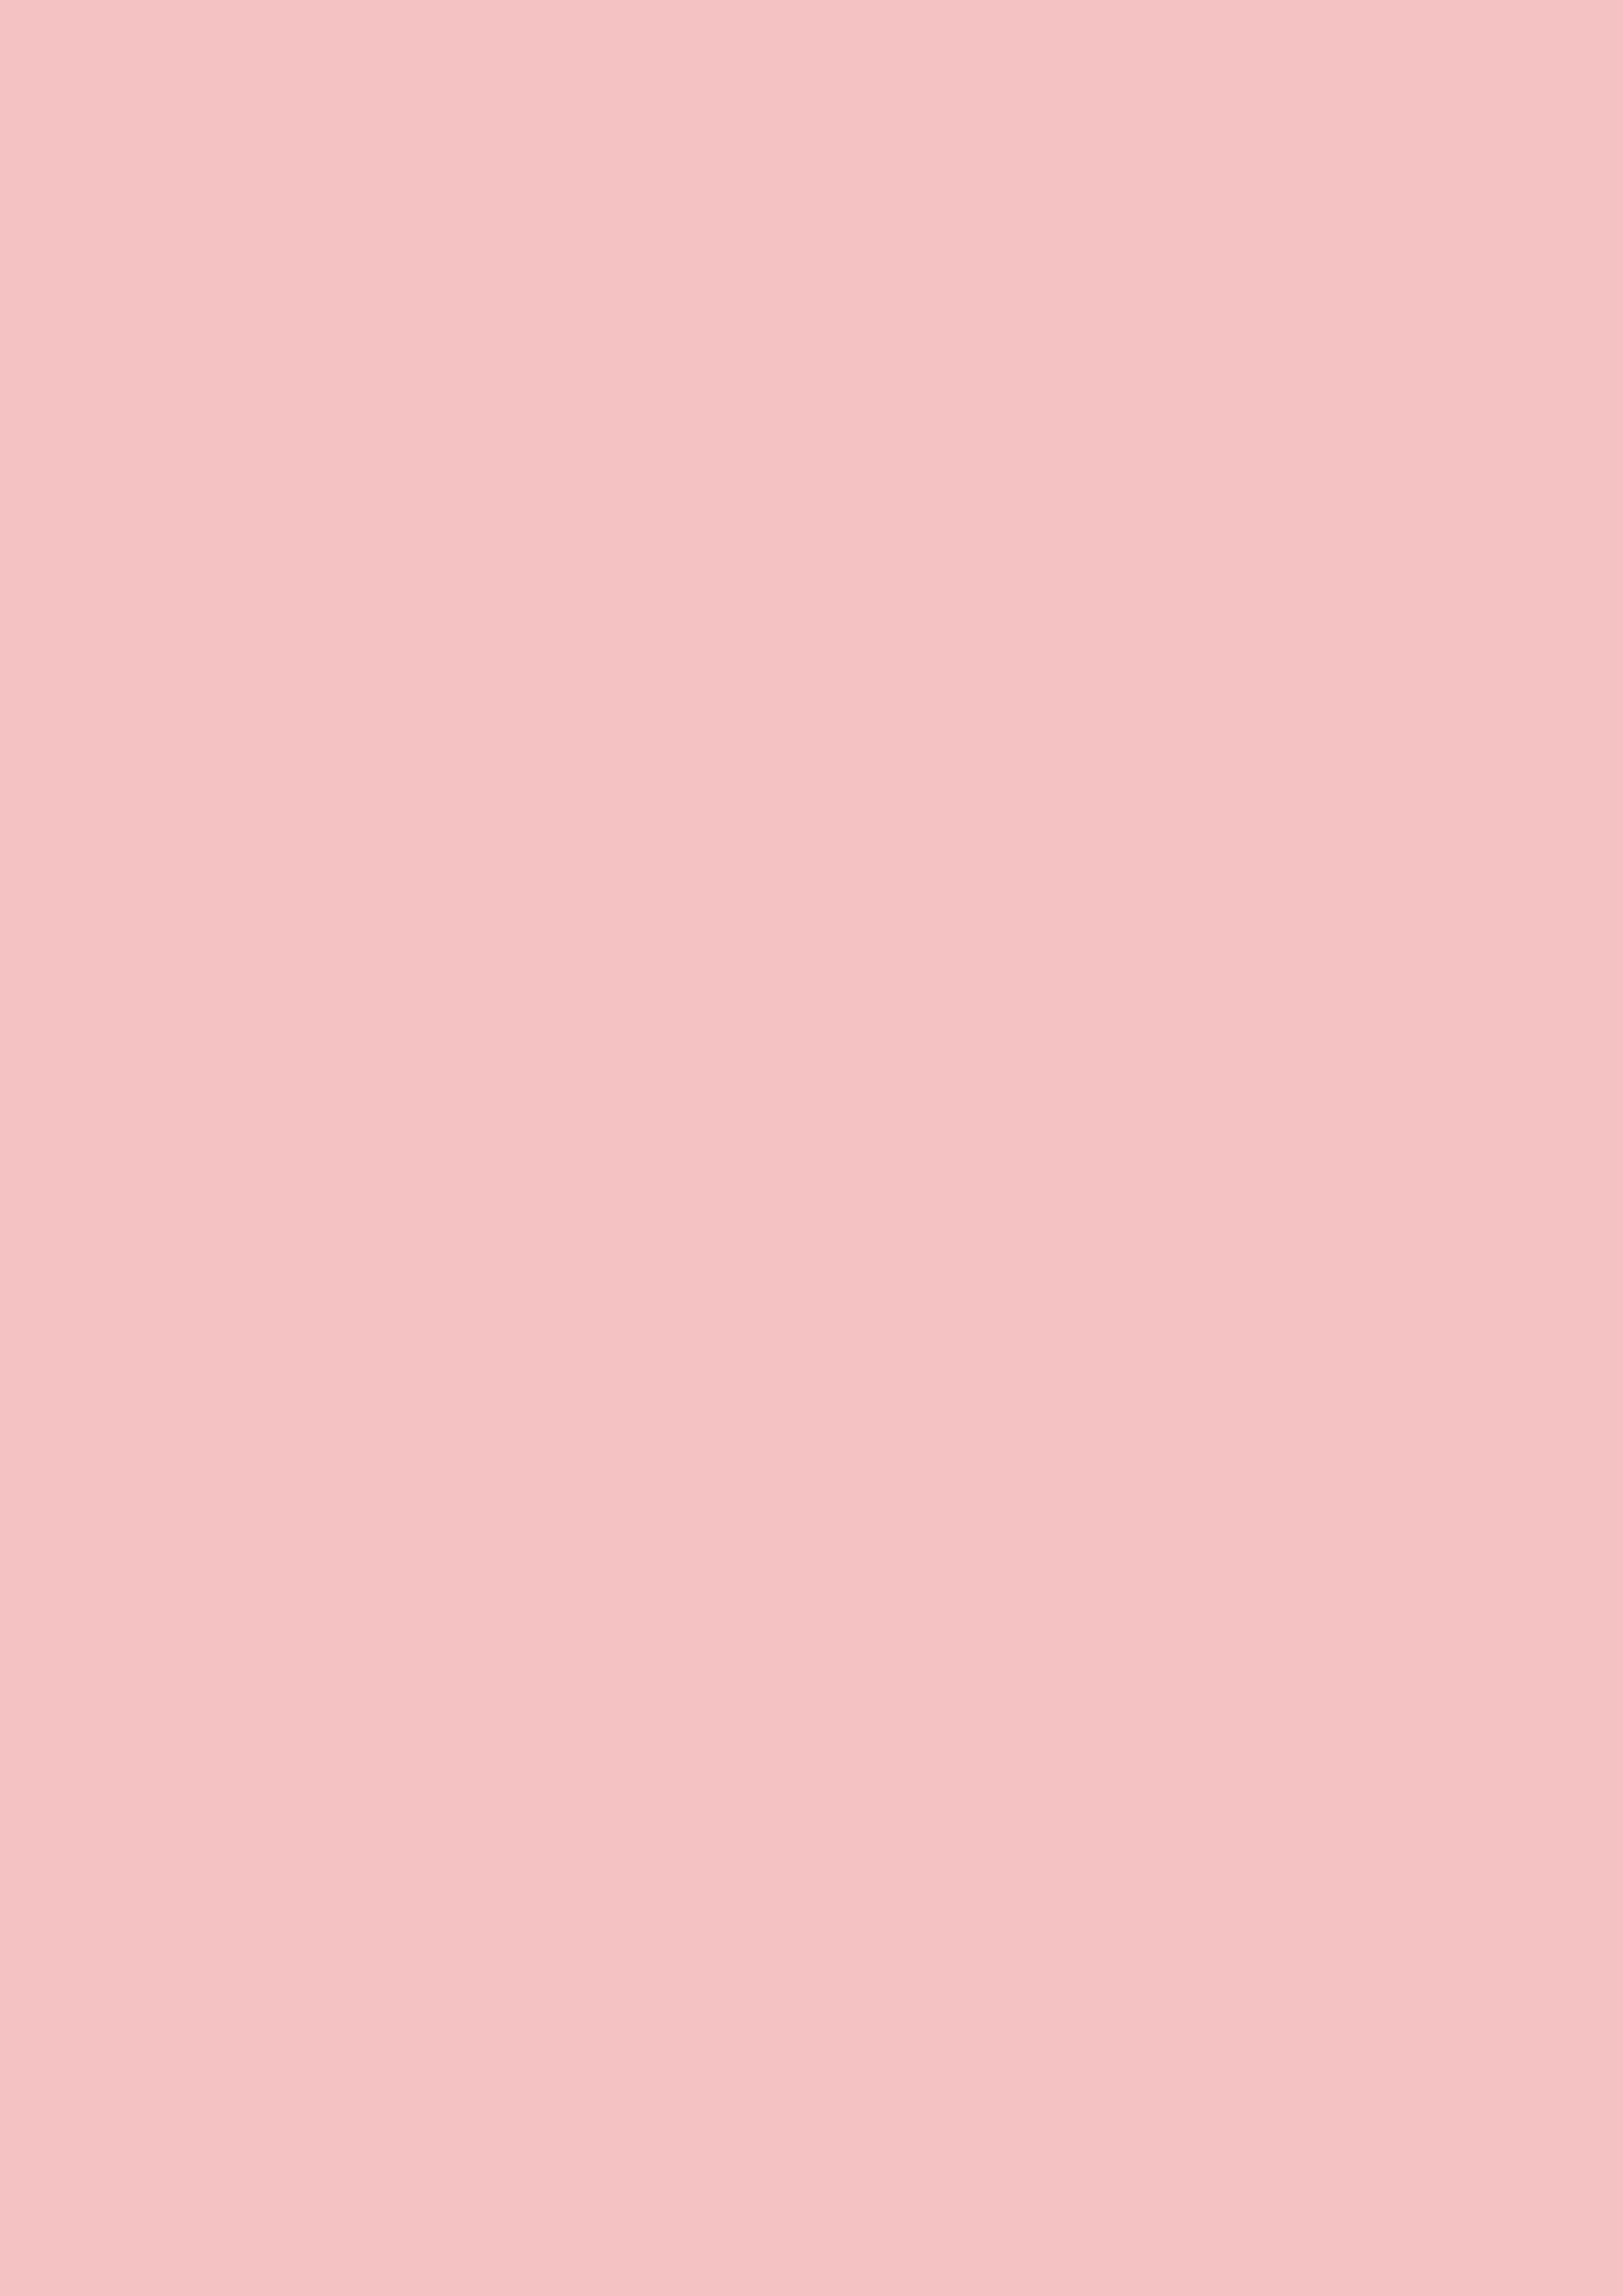 2480x3508 Baby Pink Solid Color Background